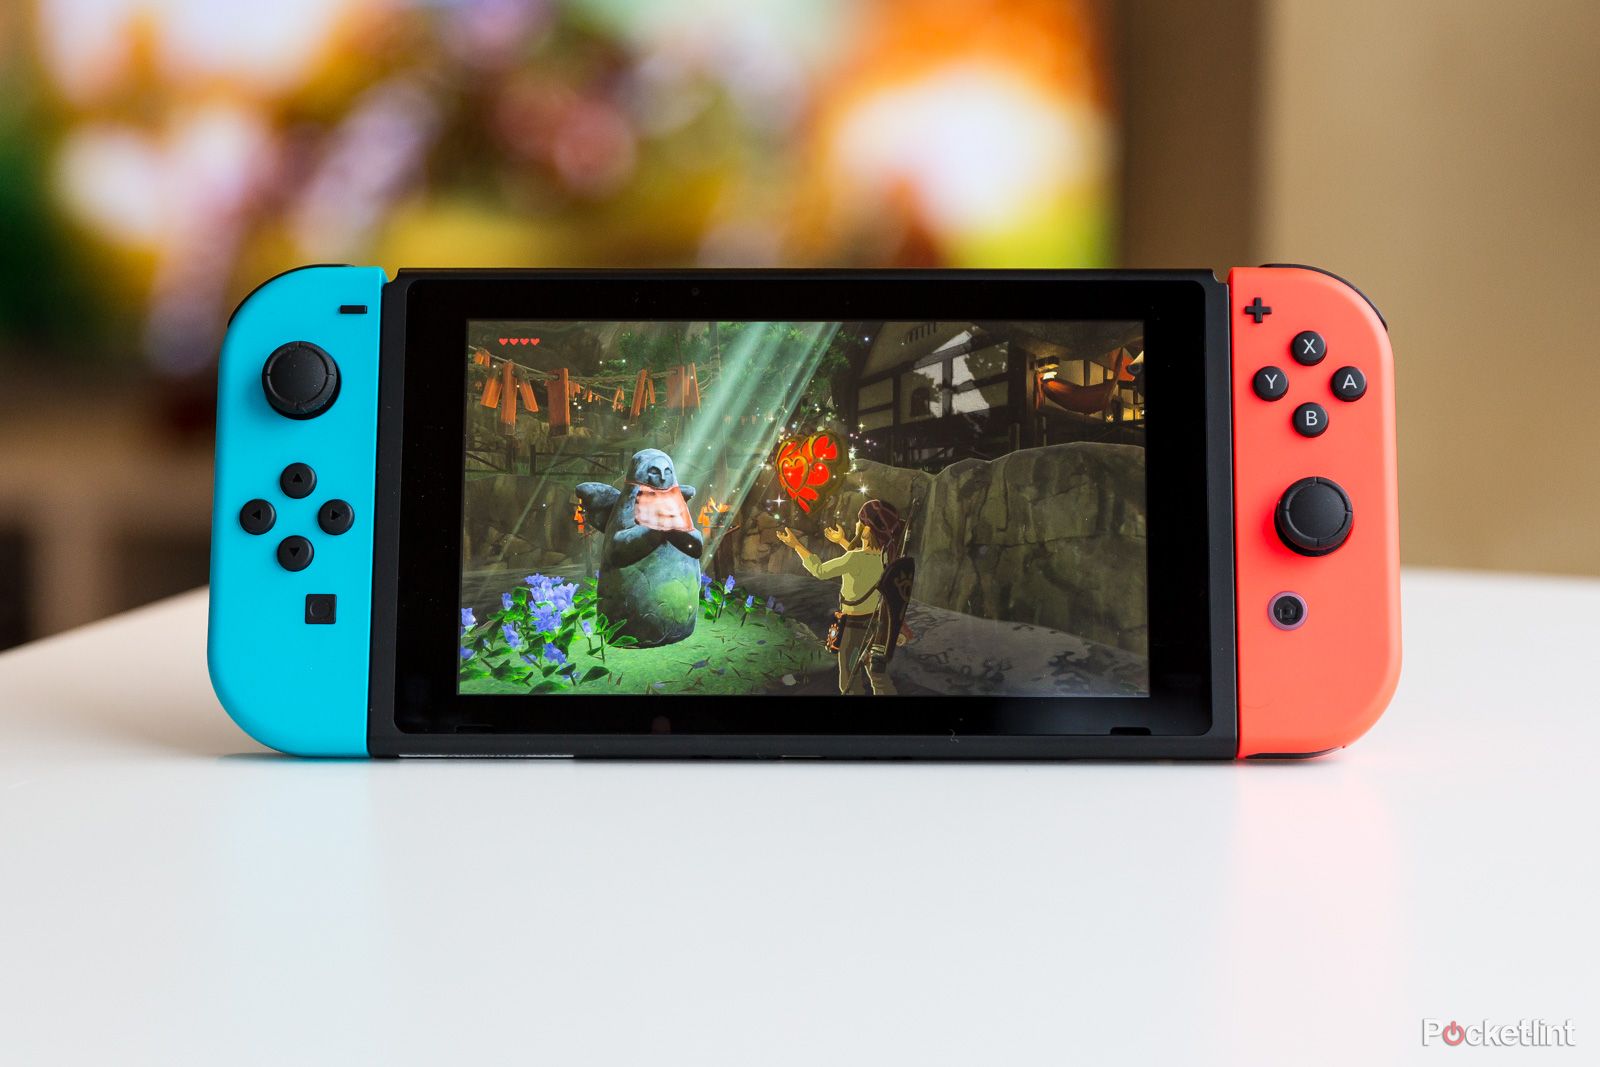 Zelda breath of the wild on a Nintendo Switch with red and blue joy cons